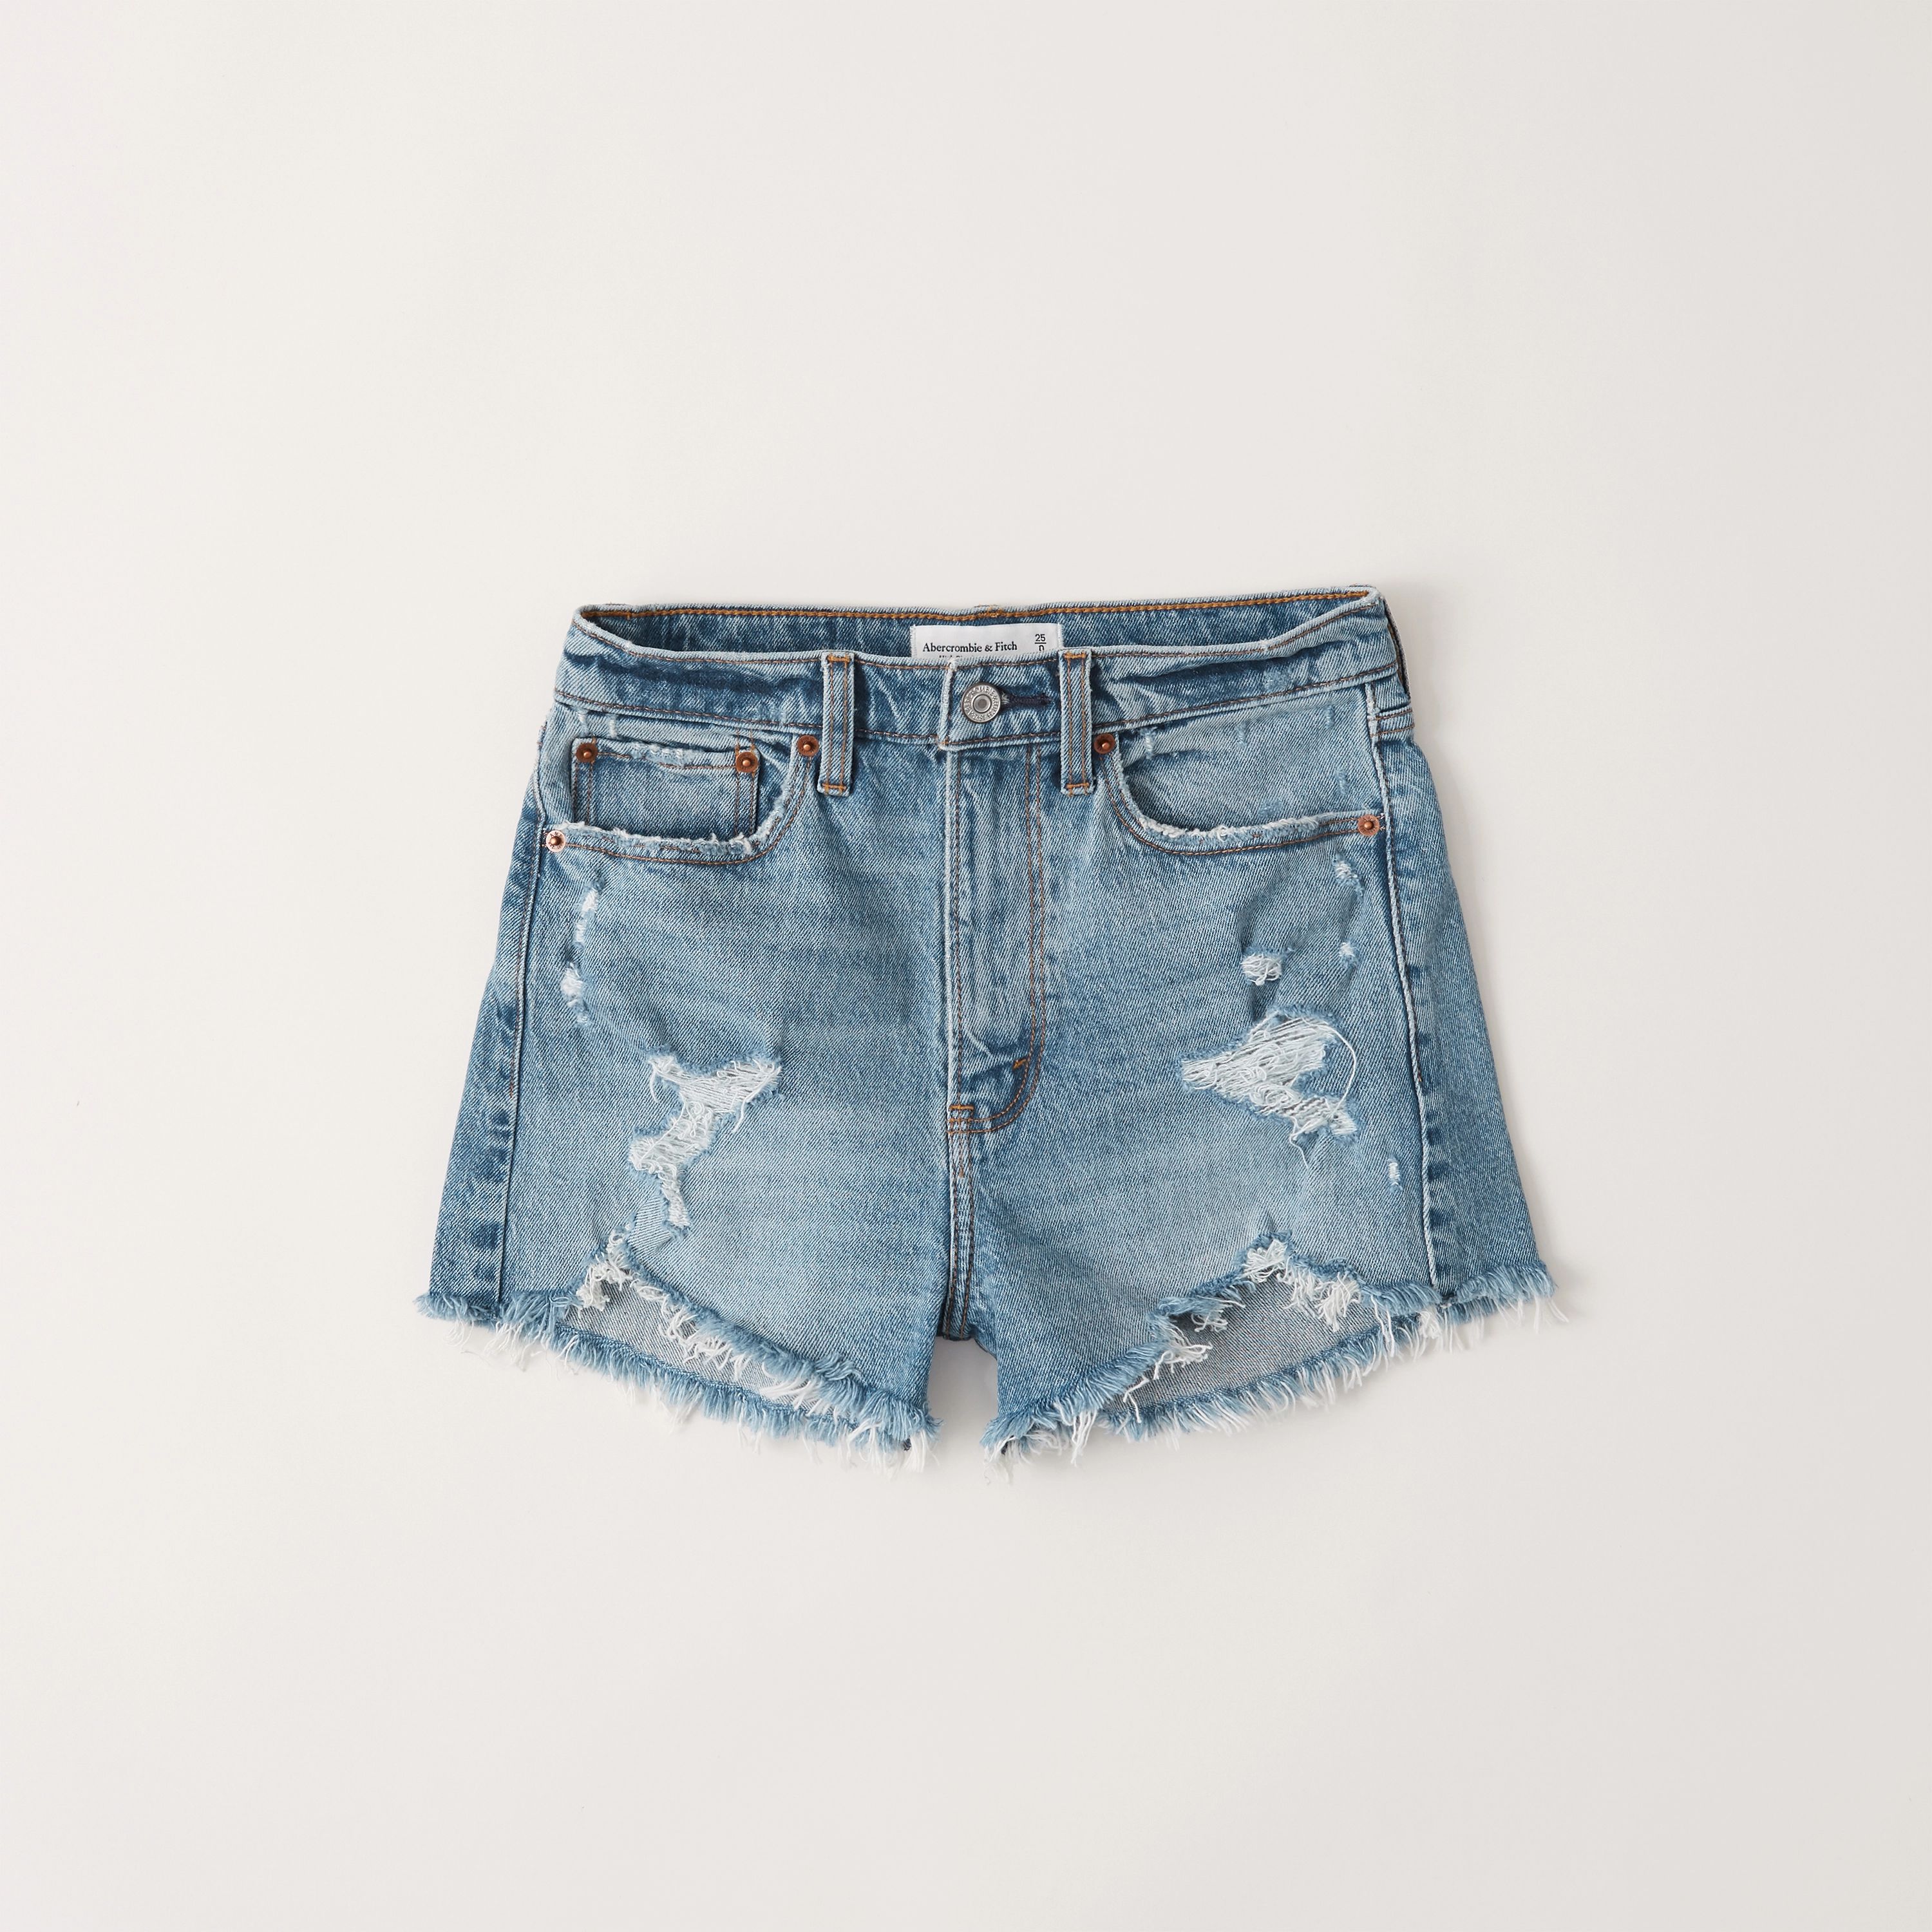 A&F Vintage Stretch Denim
			


  
						High Rise Mom Shorts | Abercrombie & Fitch (US)